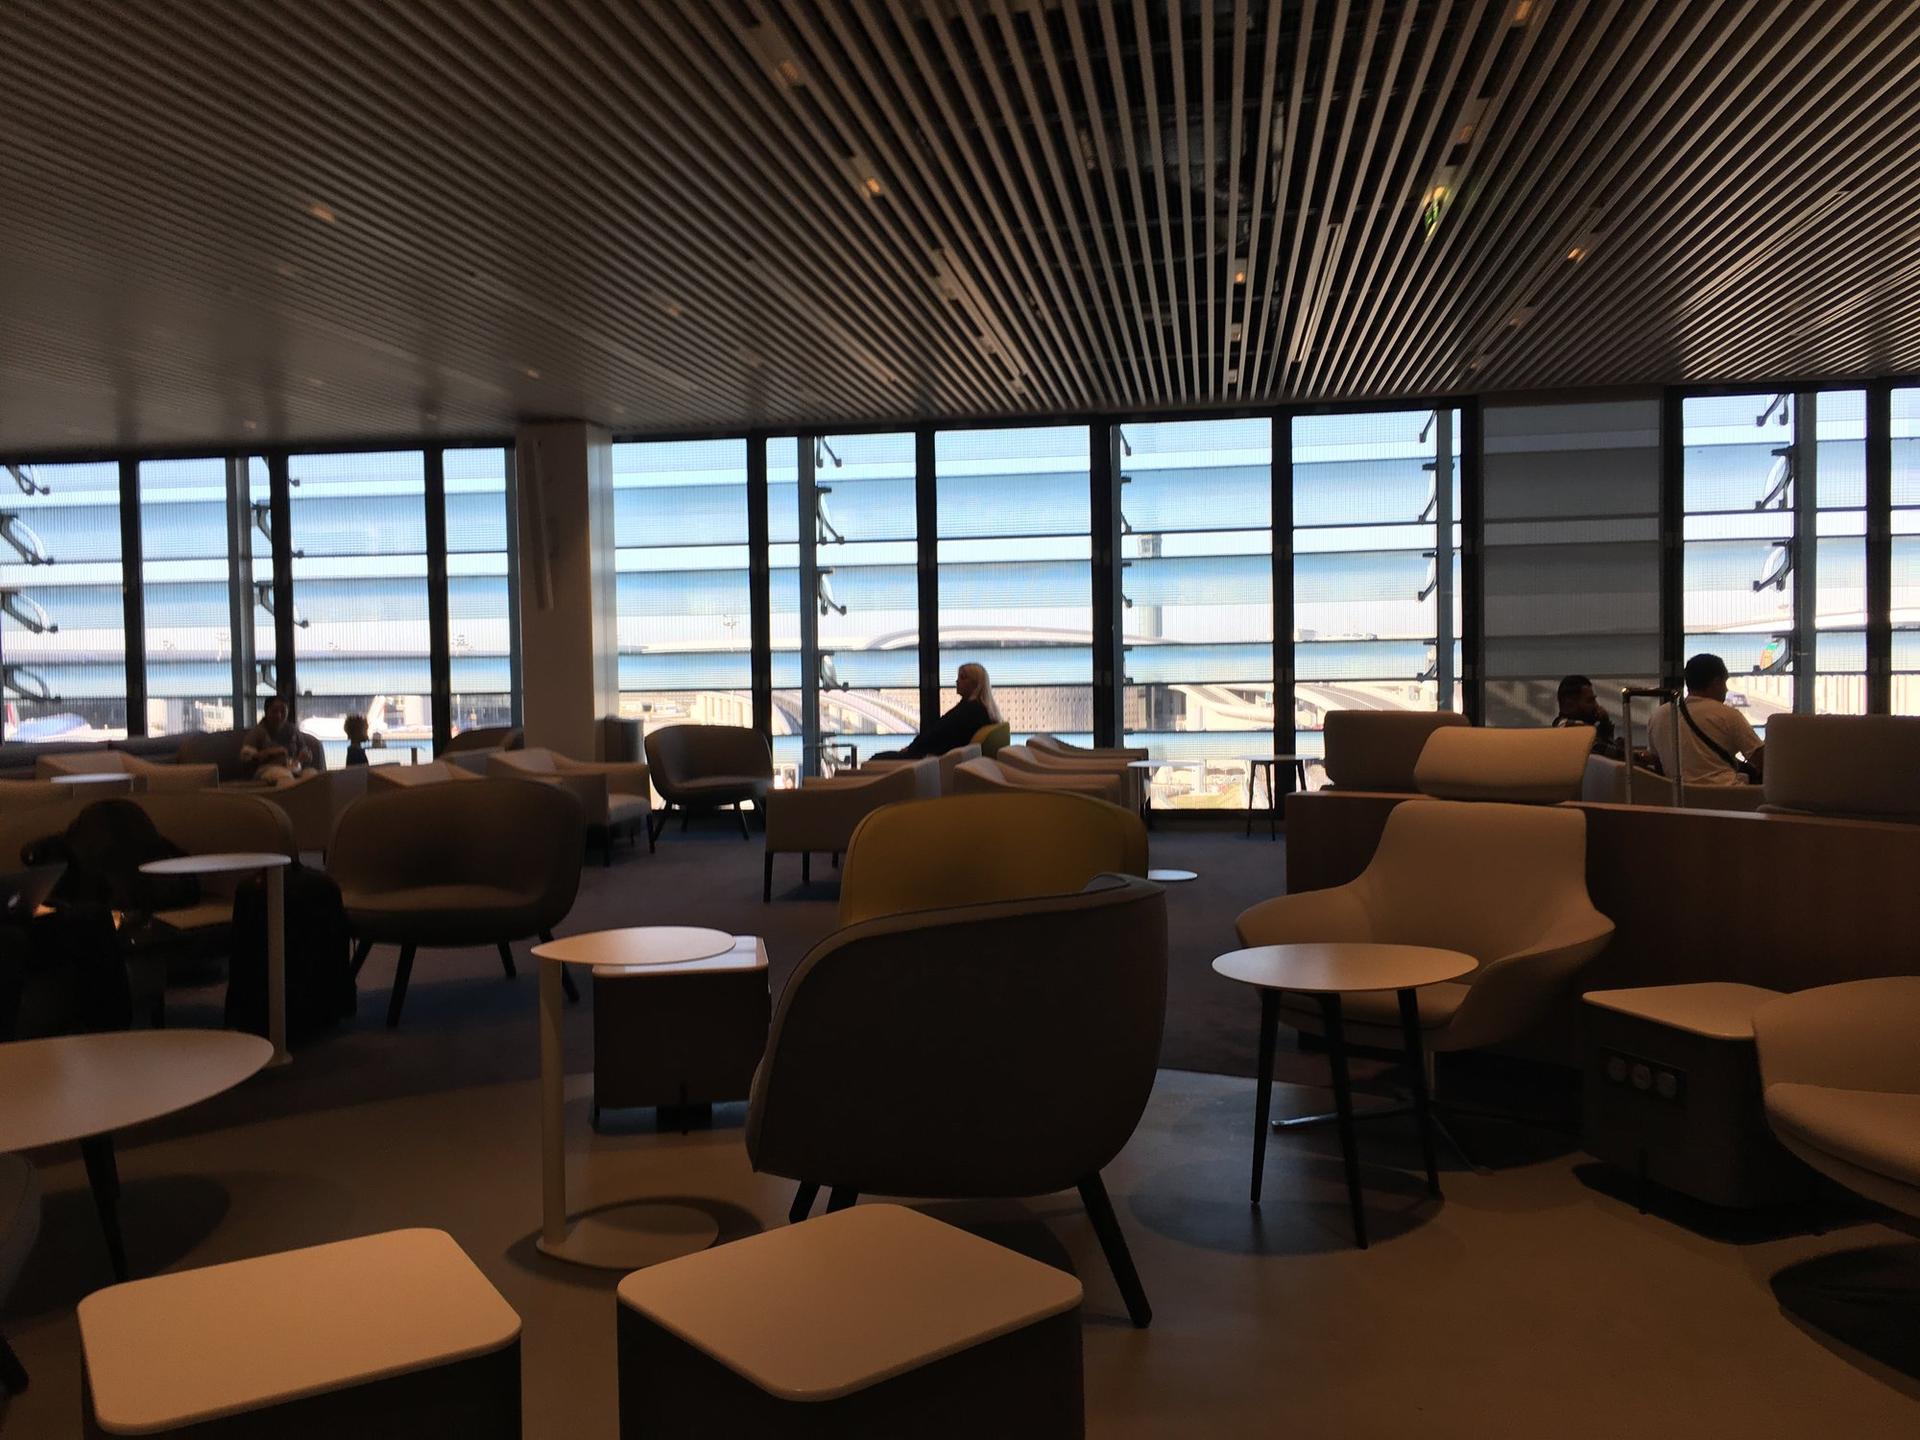 Air France Lounge (Concourse L) image 42 of 57